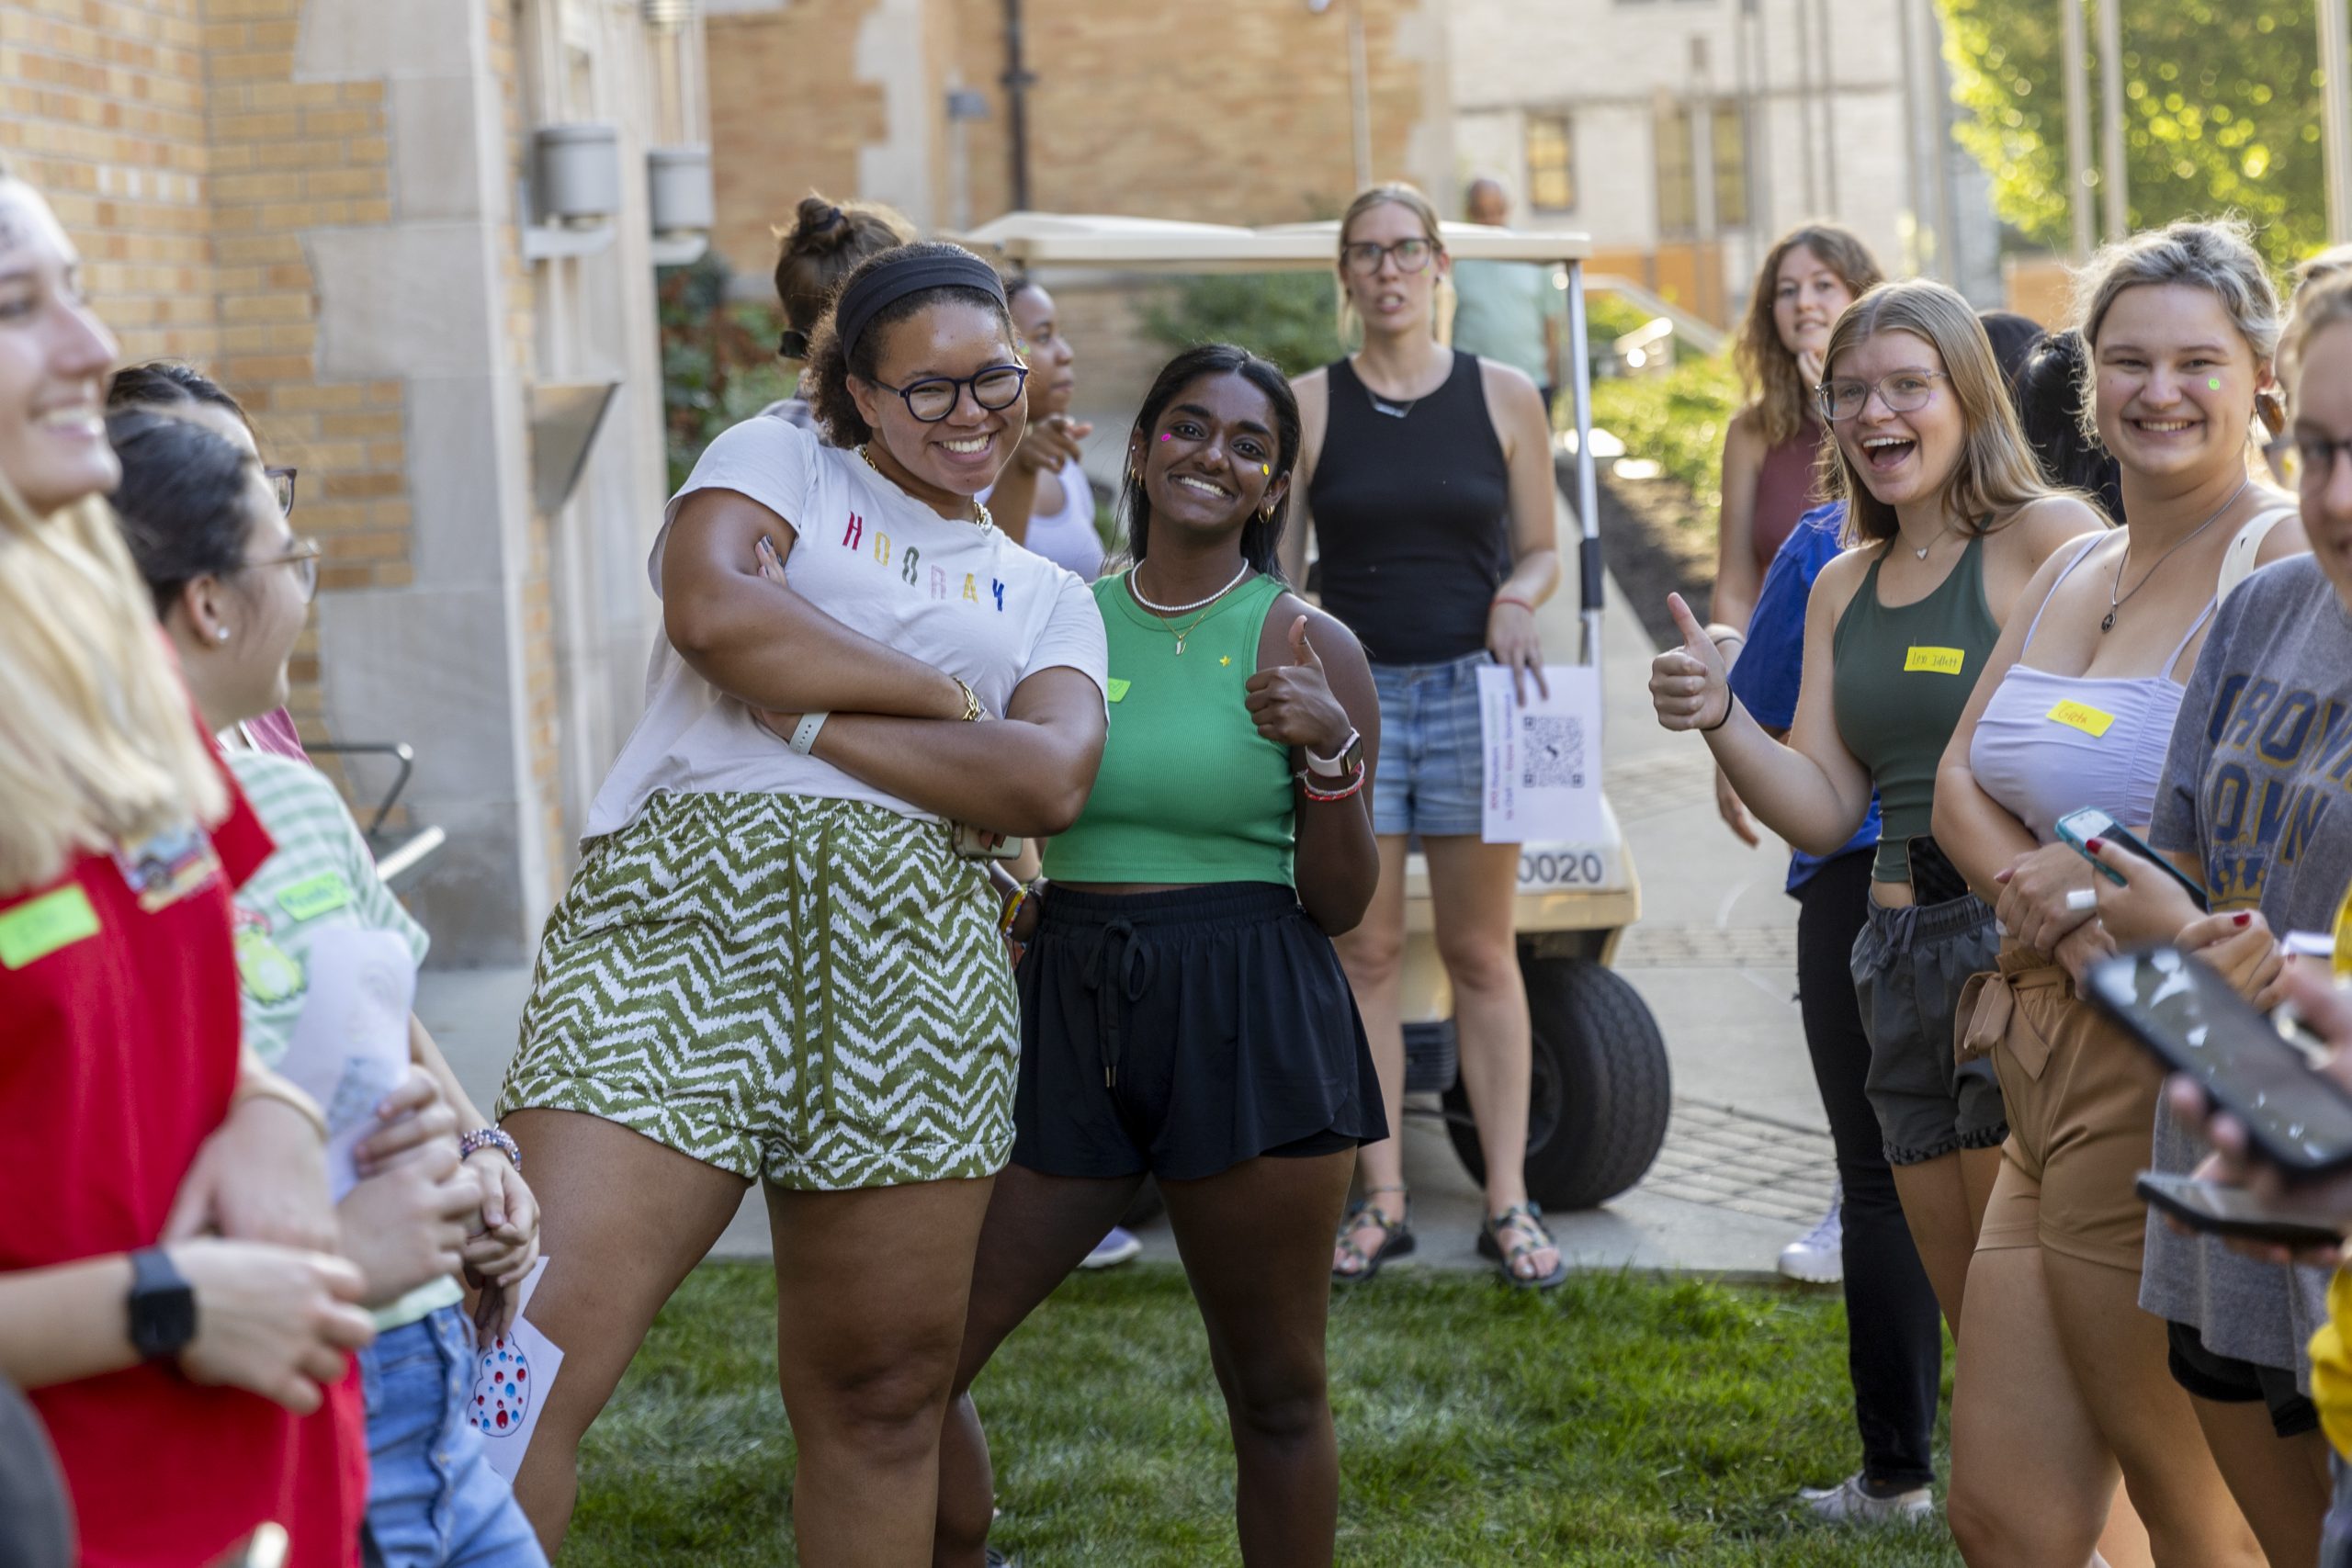 Students make door decorations, take photos together and socialize outside of Johnston Hall